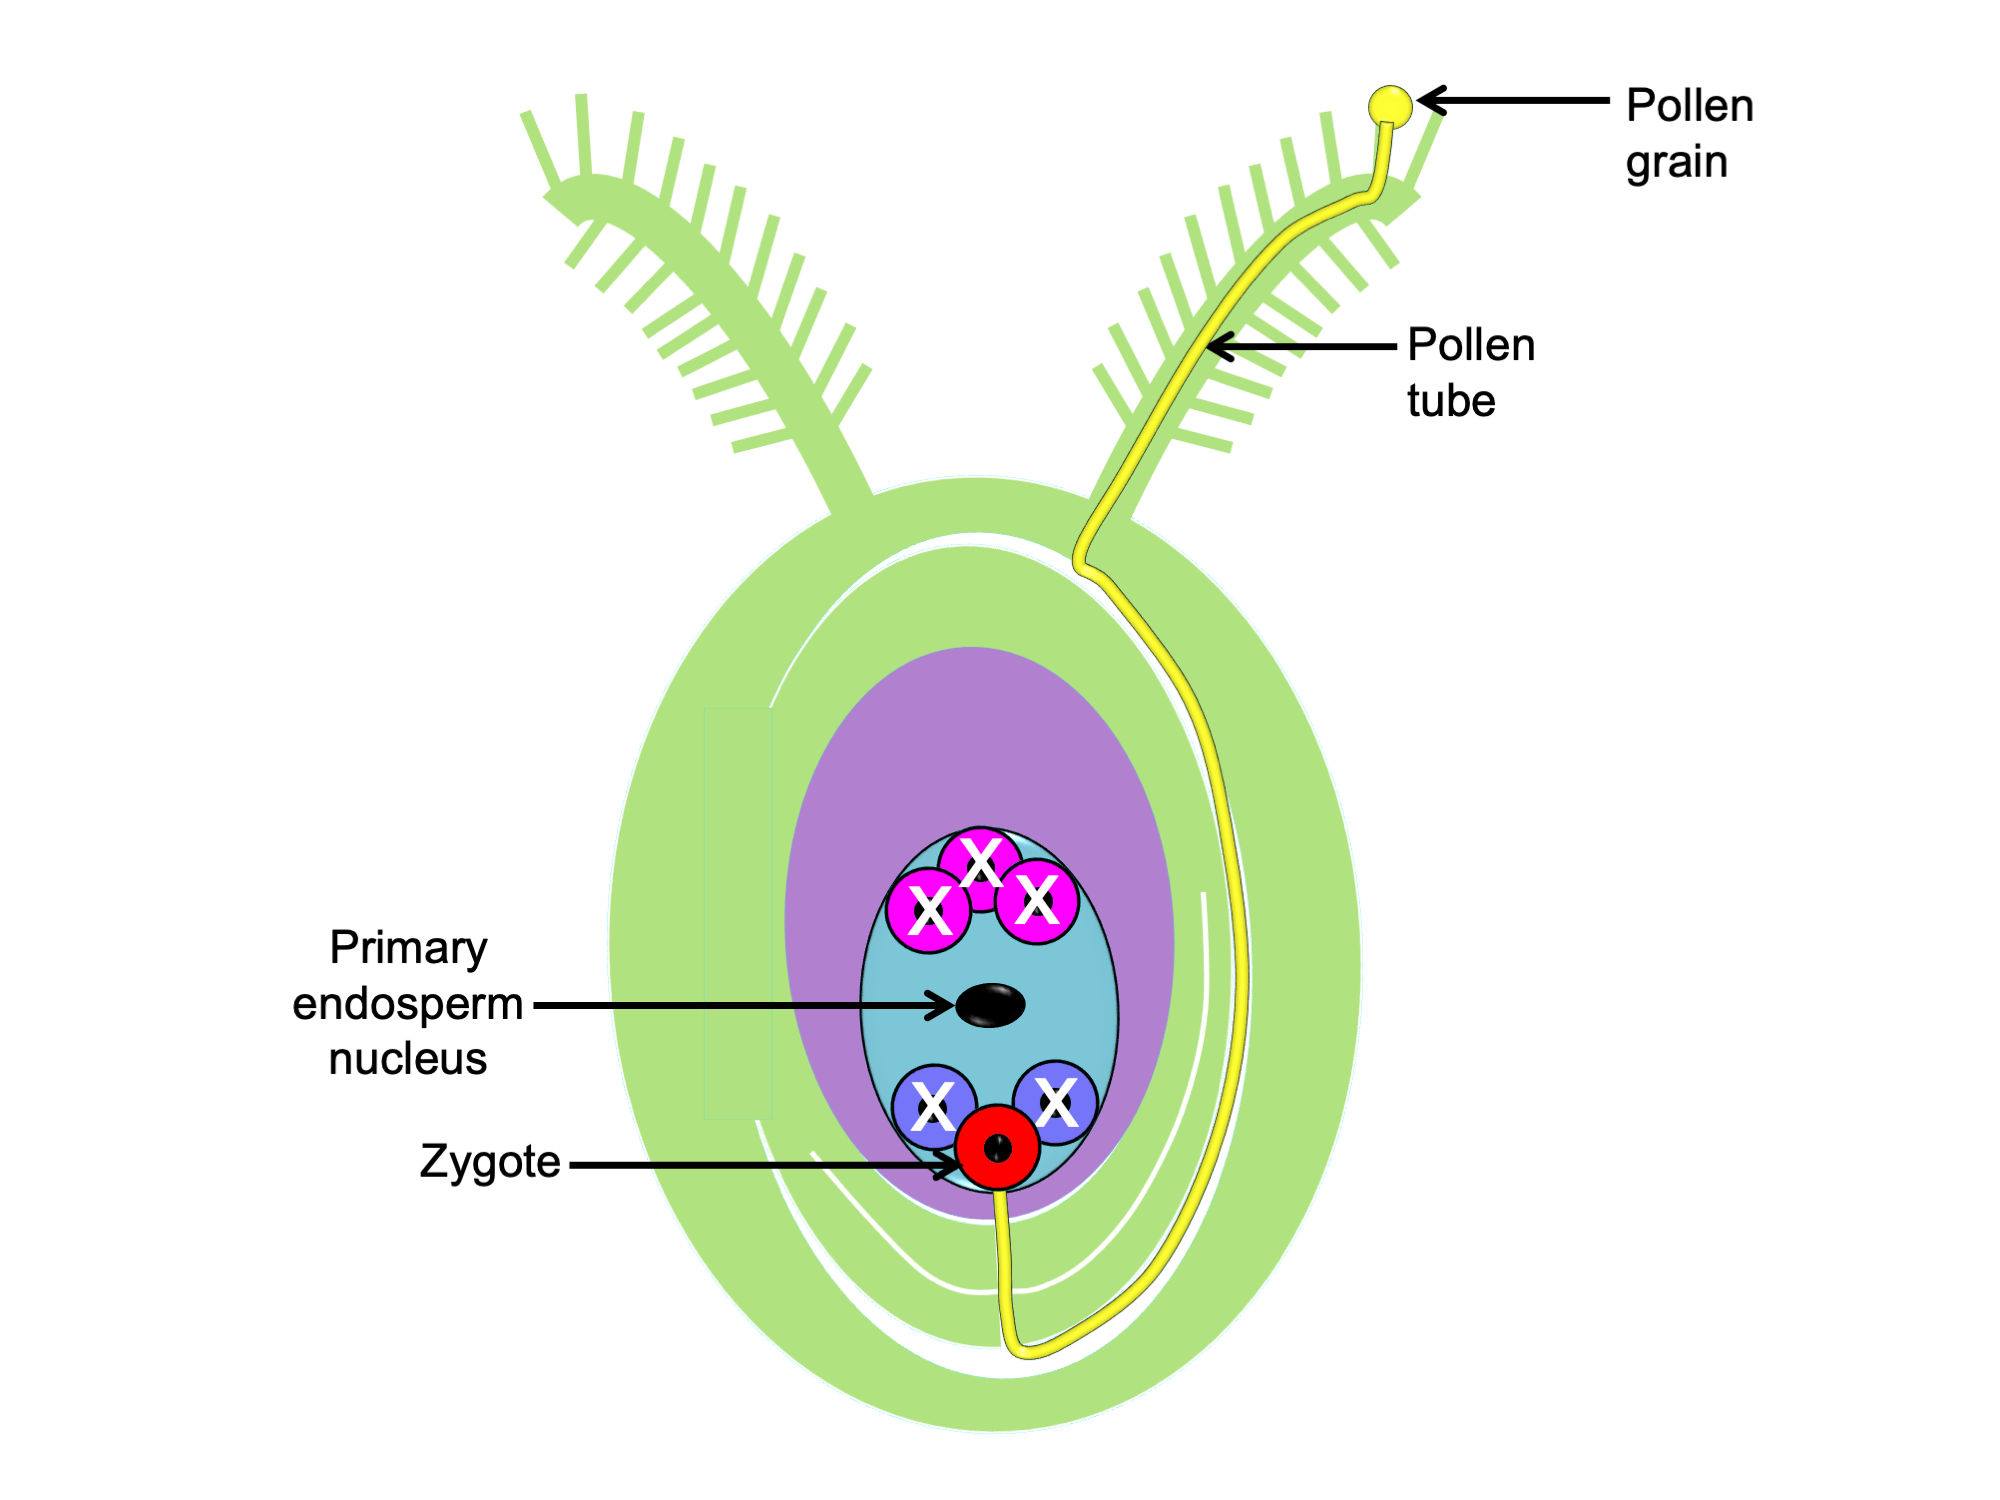 Diagram of a post-fertilization grass ovule. The ovule is depicted within an ovary with two feathery stigmas at its apex. A pollen grain is on one of the stigmas, and it has formed a pollen tube that has grown into the ovary and into the micropyle of the ovule, which is facing the base of the ovary. The pollen tube ends at the embryo sac. Three cells occur on the side of the embryo sac near the micropyle: one zygote and two other cells flanking it. The two lateral cells have exes over them, indicating that they have degenerated. At the opposite end of the embryo sac, three other cells also have exes over them. In the center of the embryo sac is a large nucleus called the primary endosperm nucleus.